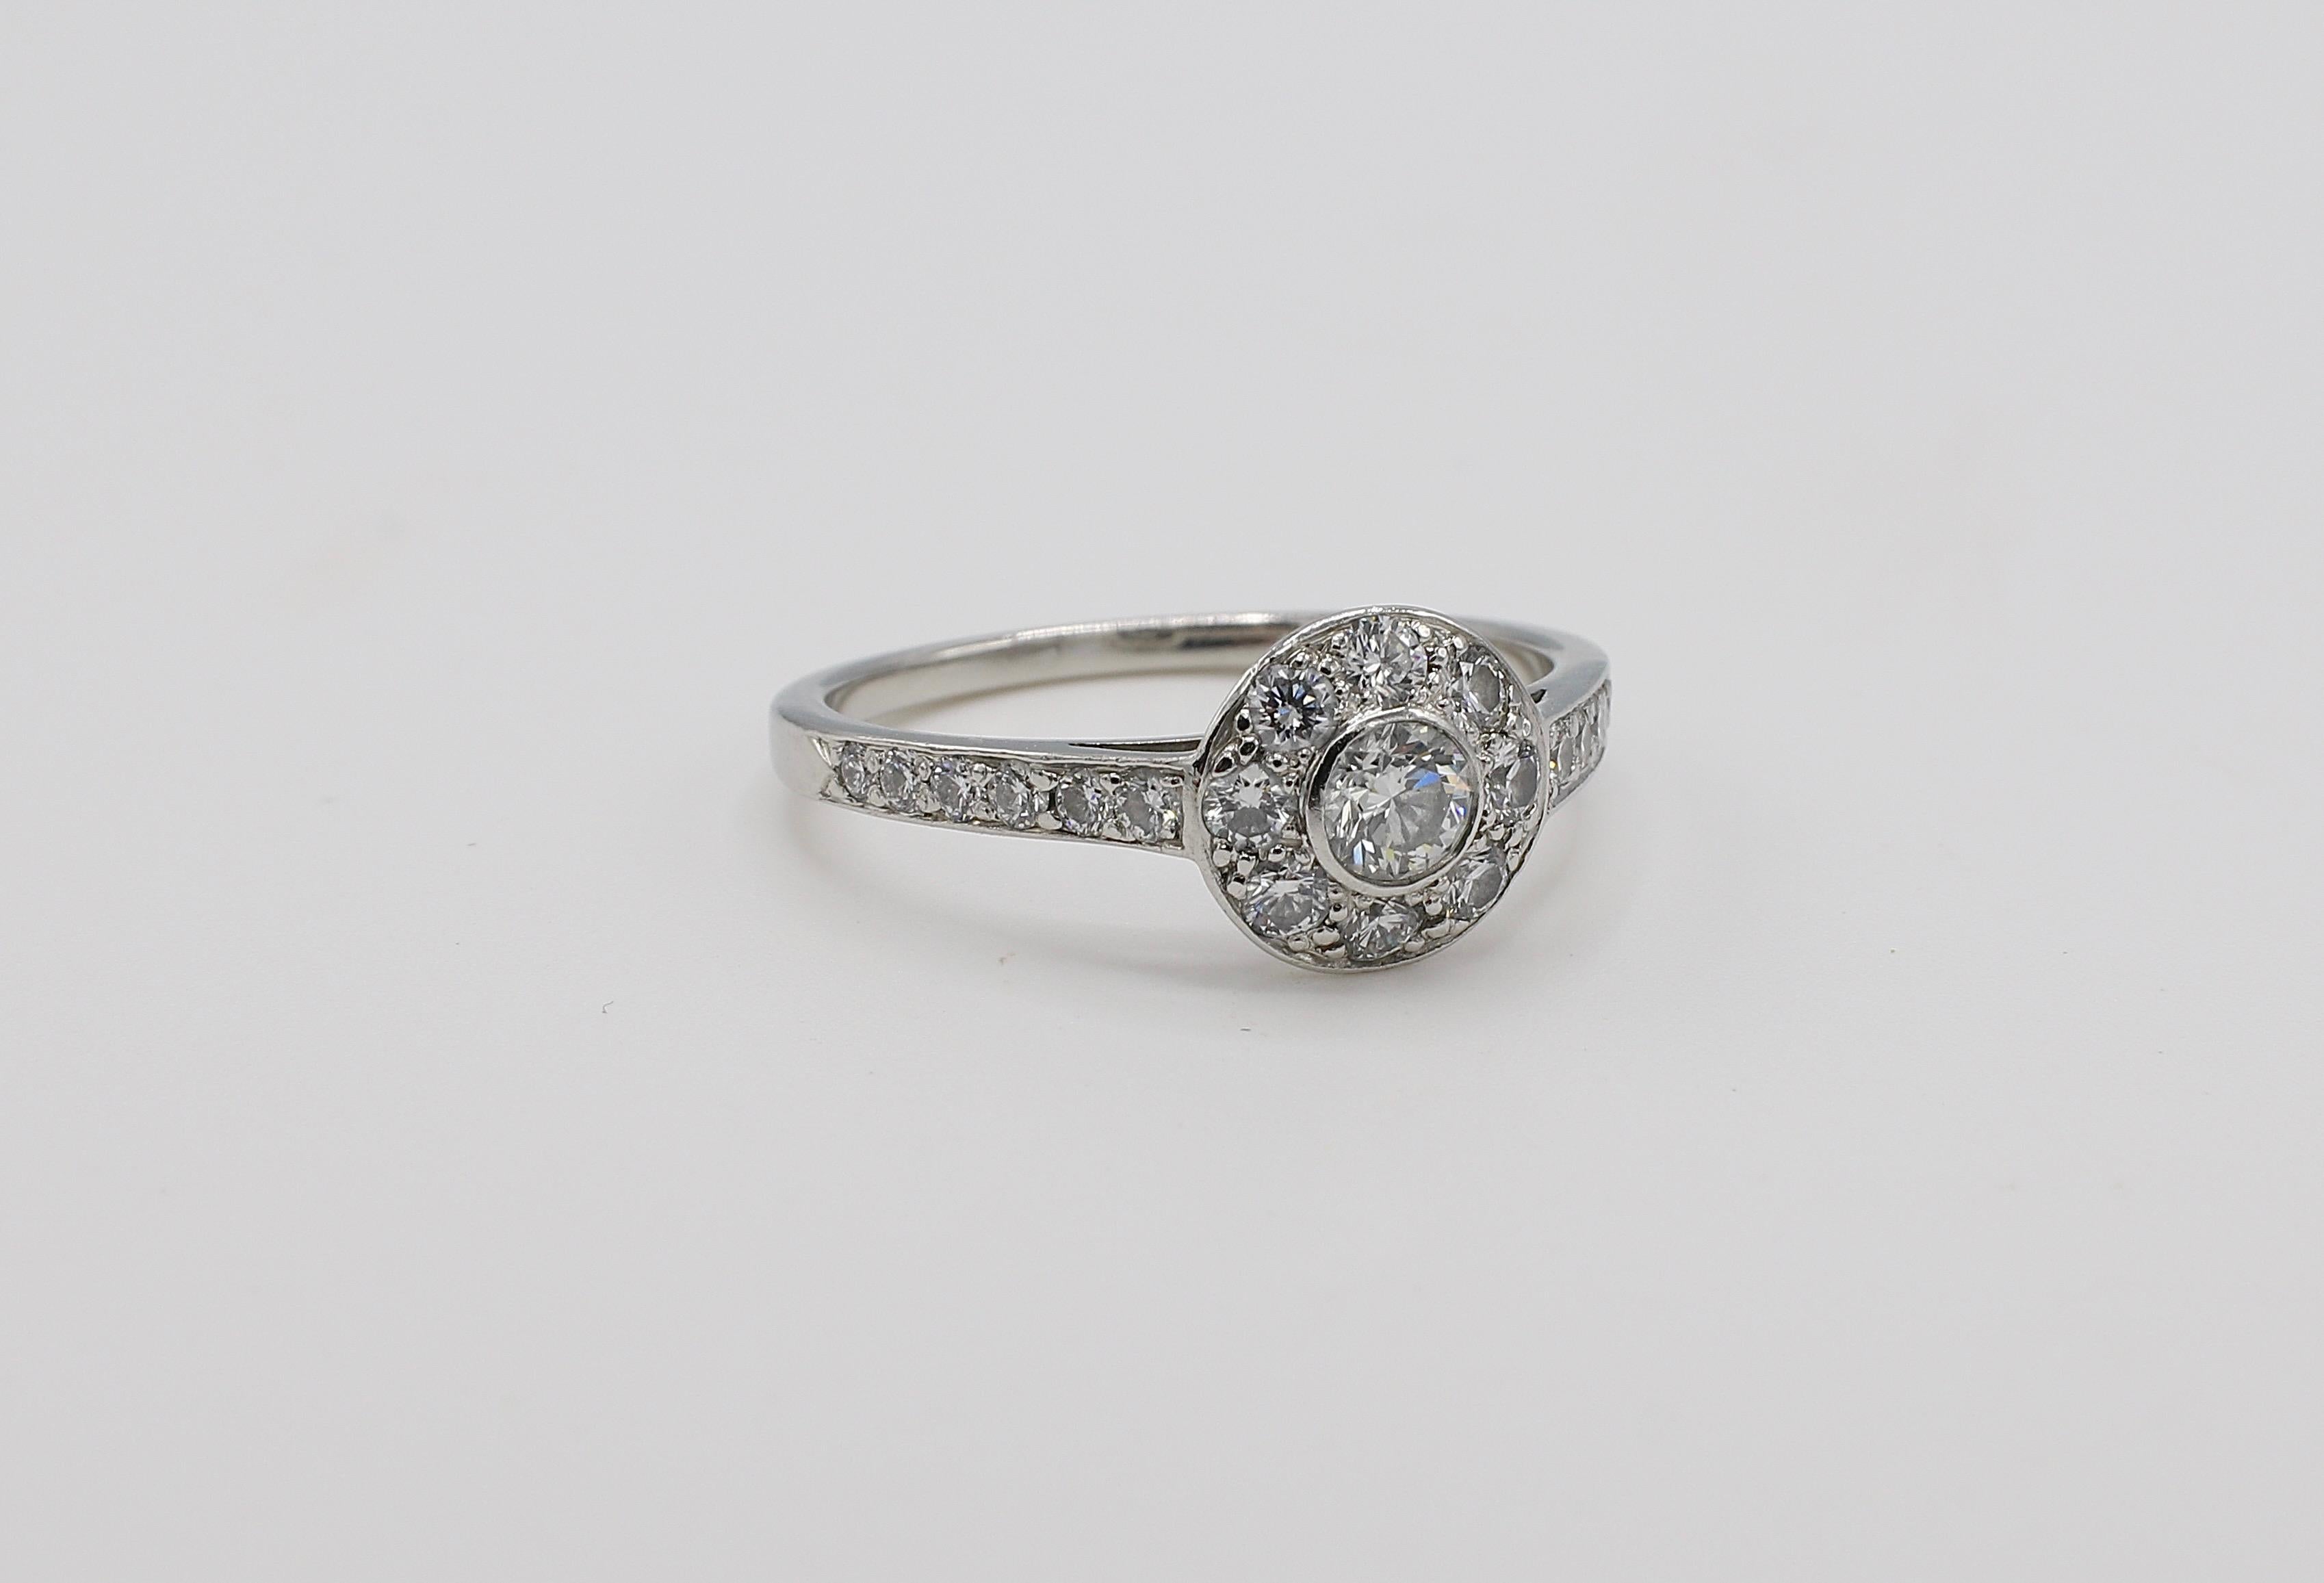 Tiffany & Co. Circlet Collection Platinum Diamond 0.65 CTW Engagement Ring Size 7.5

Metal: Platinum PT950
Weight: 3.87 grams
Diamonds: Approx. .65 CTW F-G VS
Top of ring is 8.5mm 
Size: 7.5 (US)
